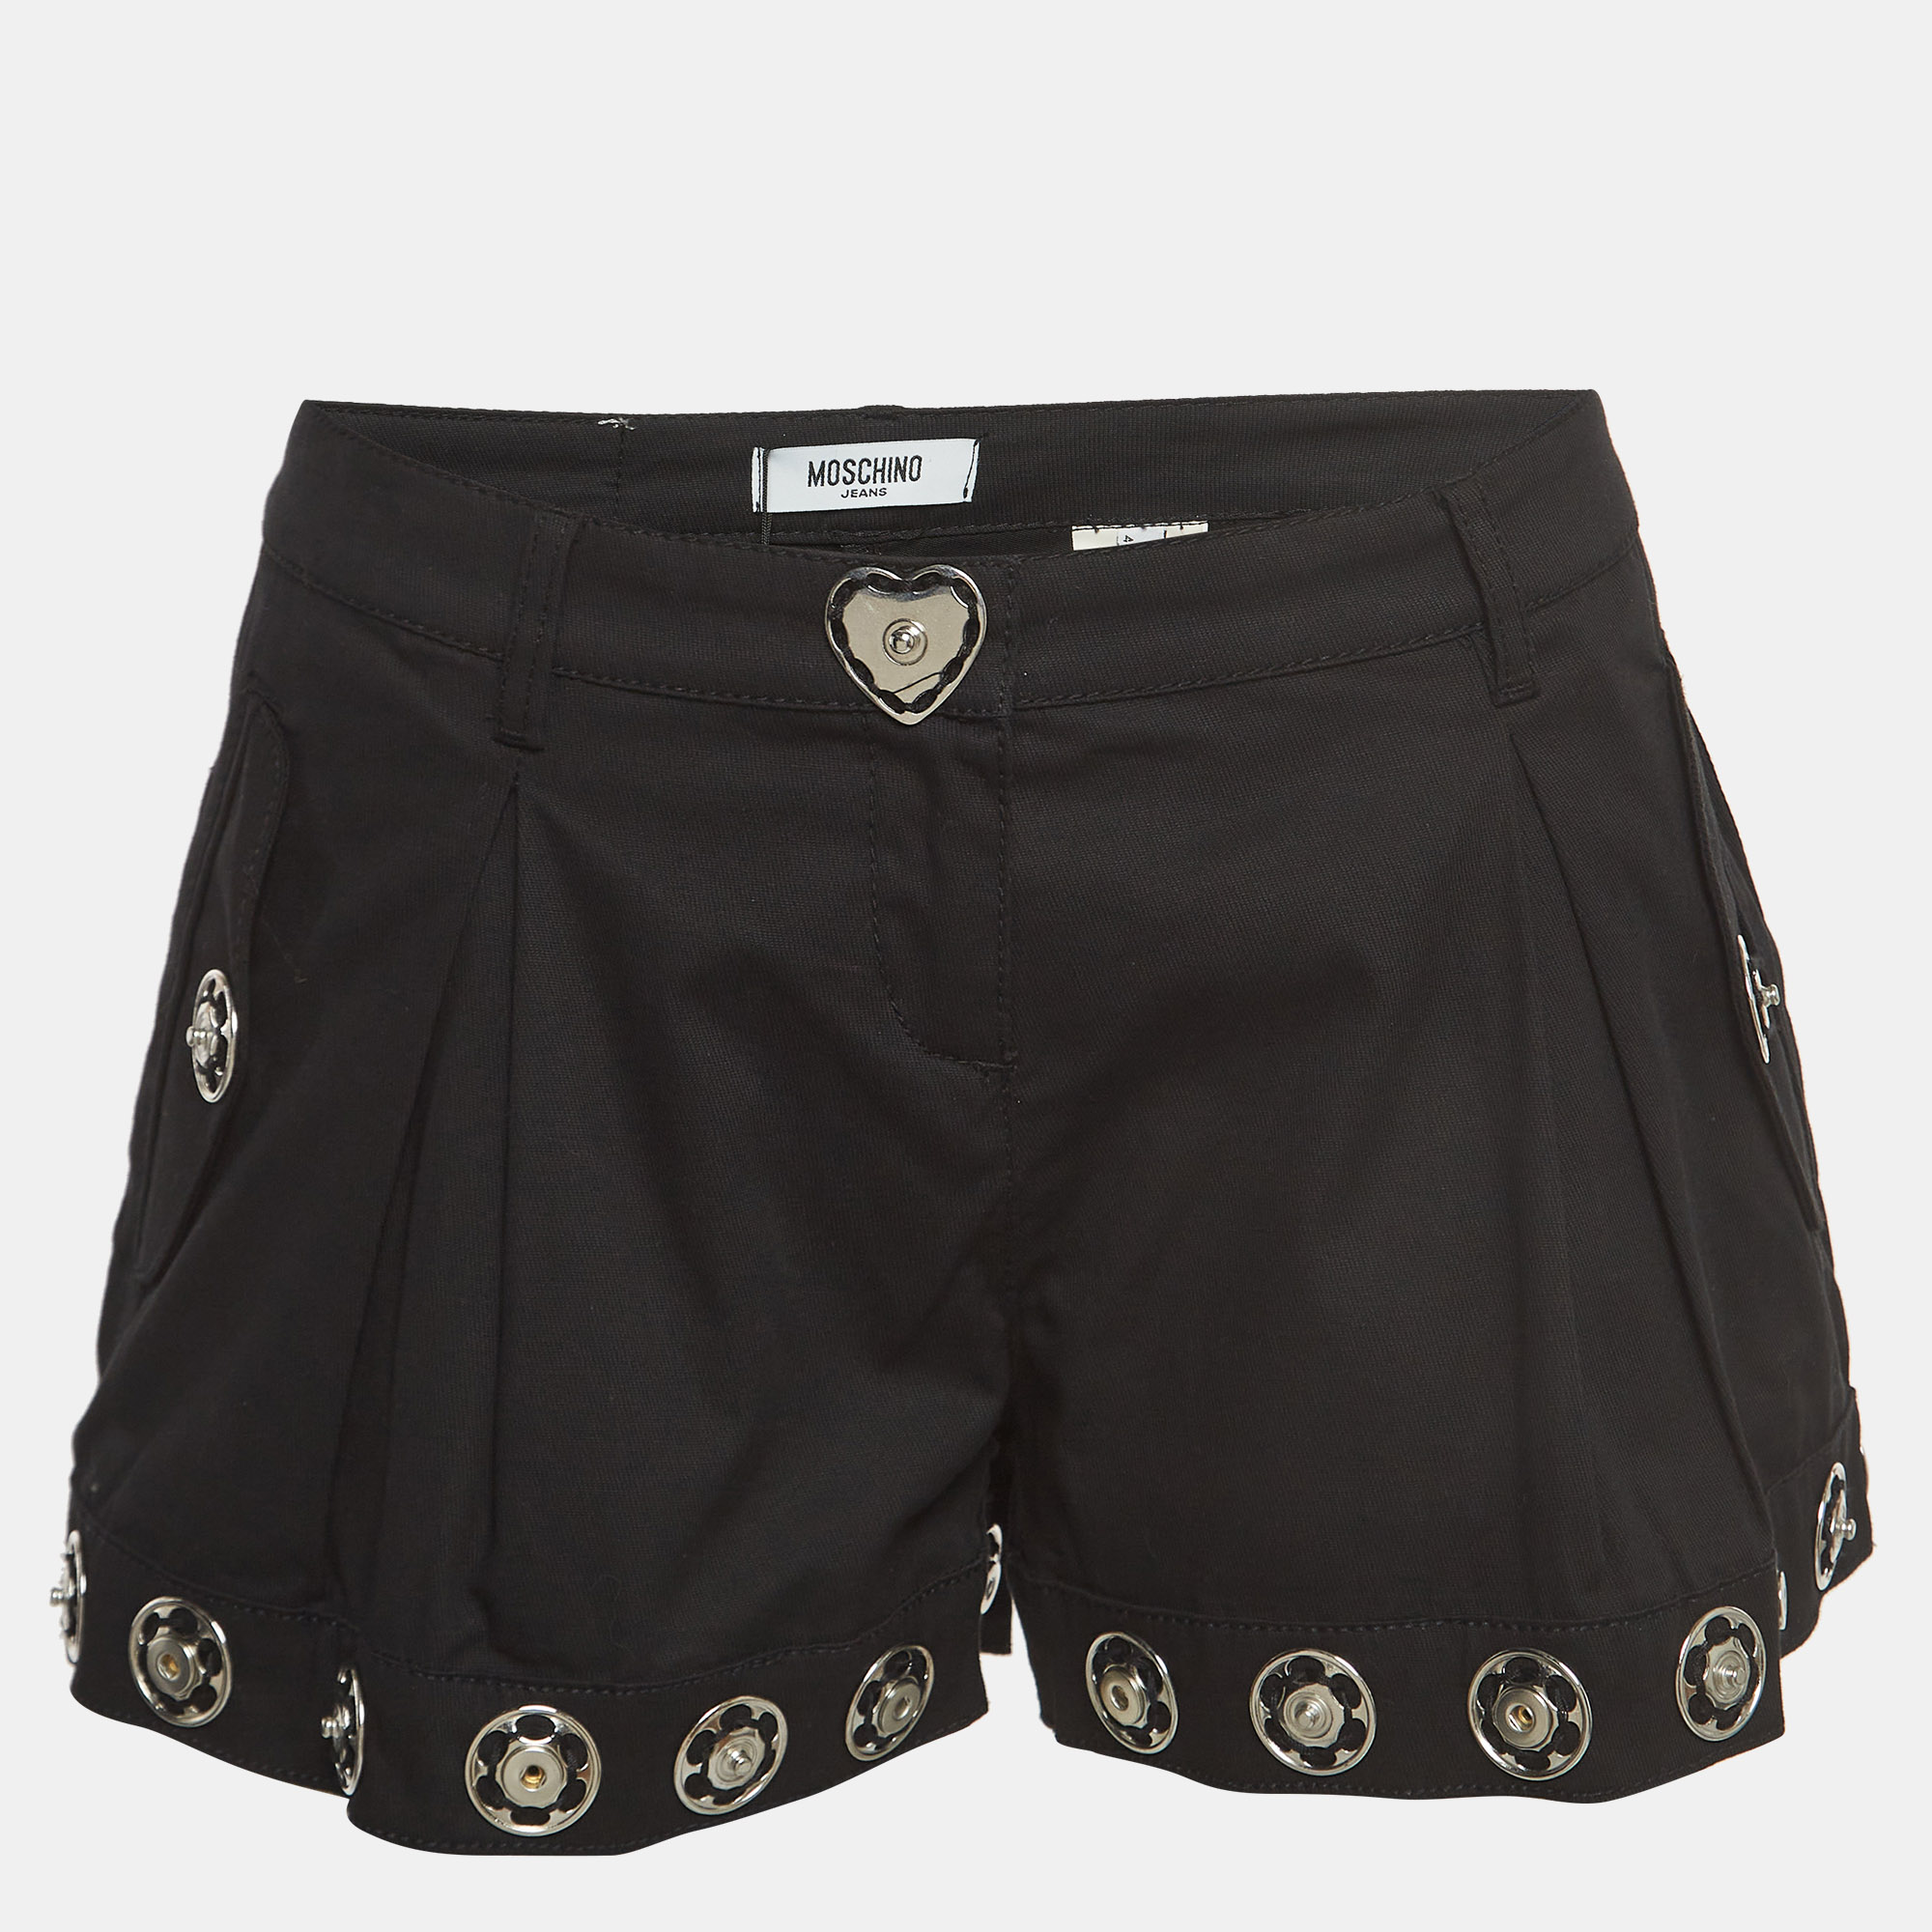 Moschino jeans black cotton press button embellished shorts m